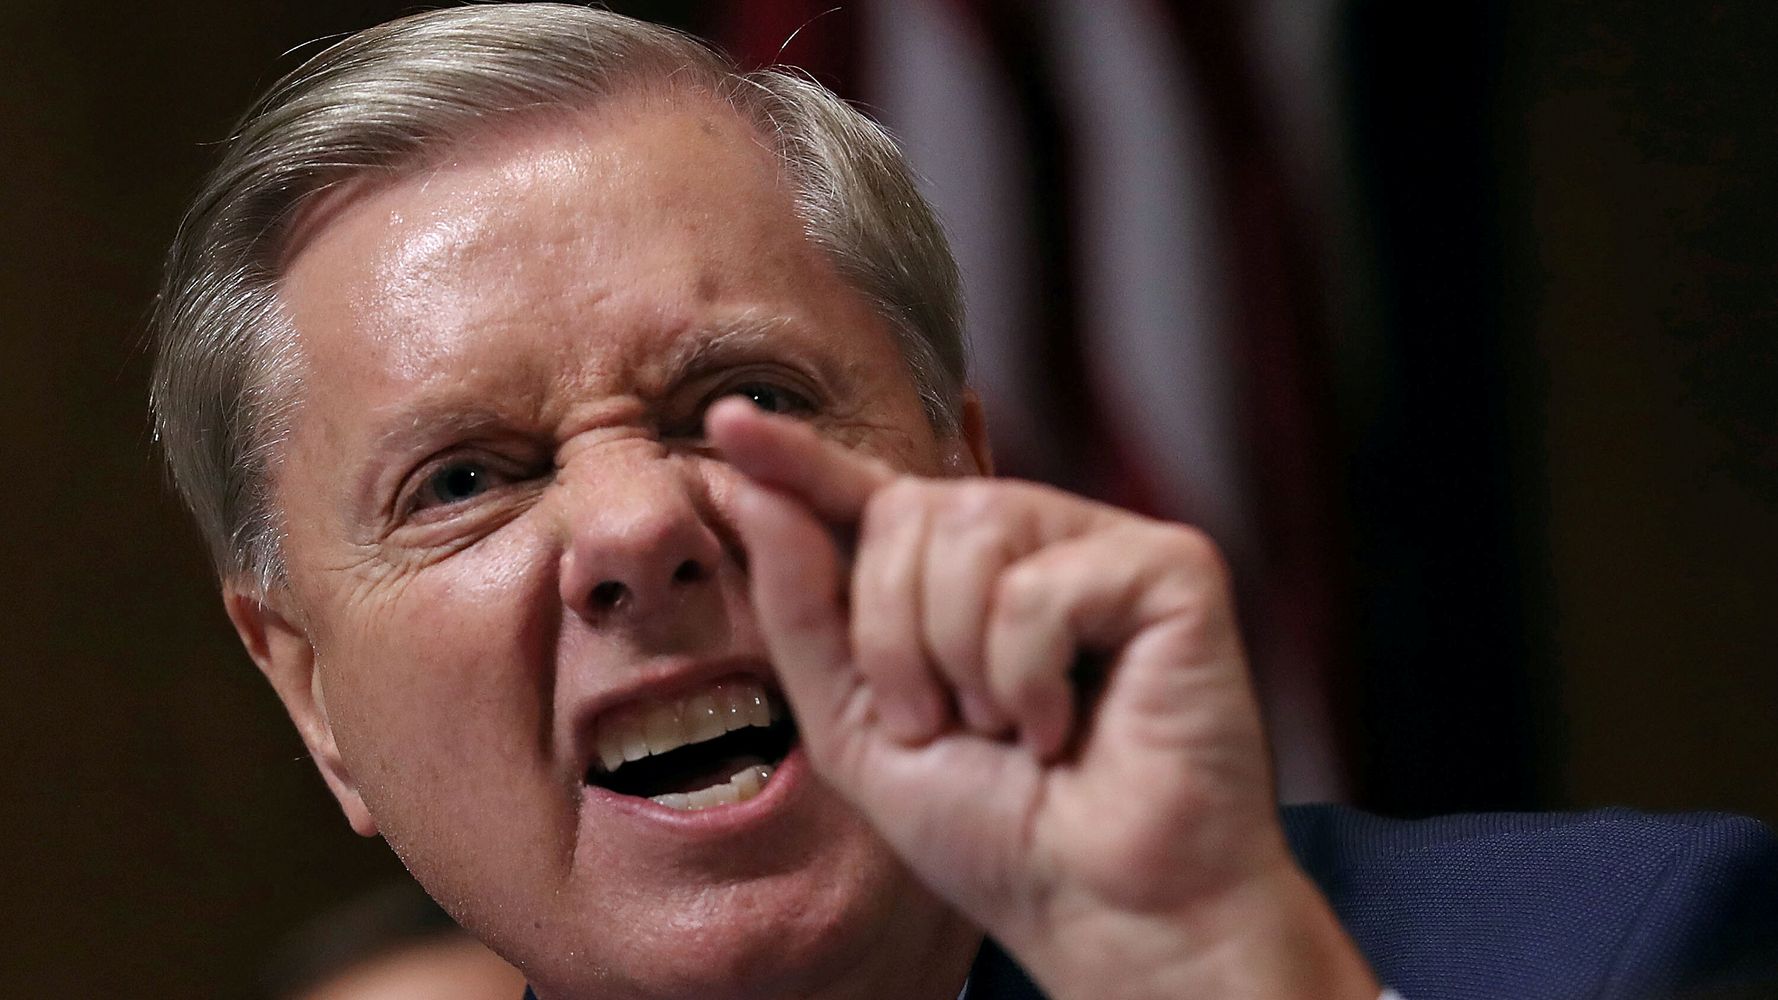 Graham Says U.S. Has A ‘Place’ For Women Who Follow ‘Traditional Family Structure’